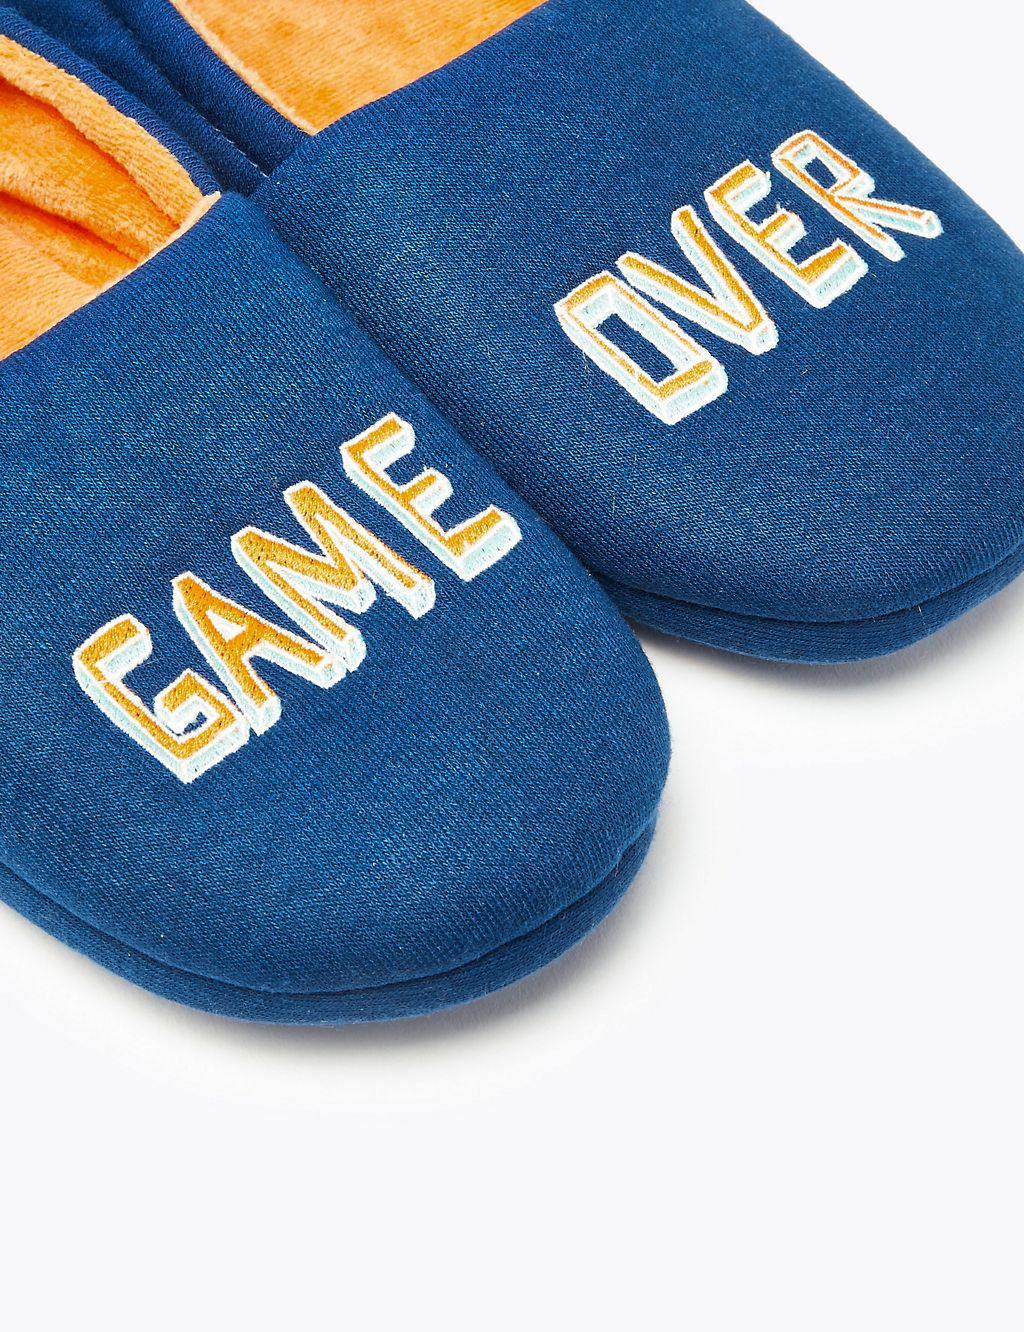 Kids’ Game Over Fleece Slippers (13 Small - 7 Large) 4 of 5